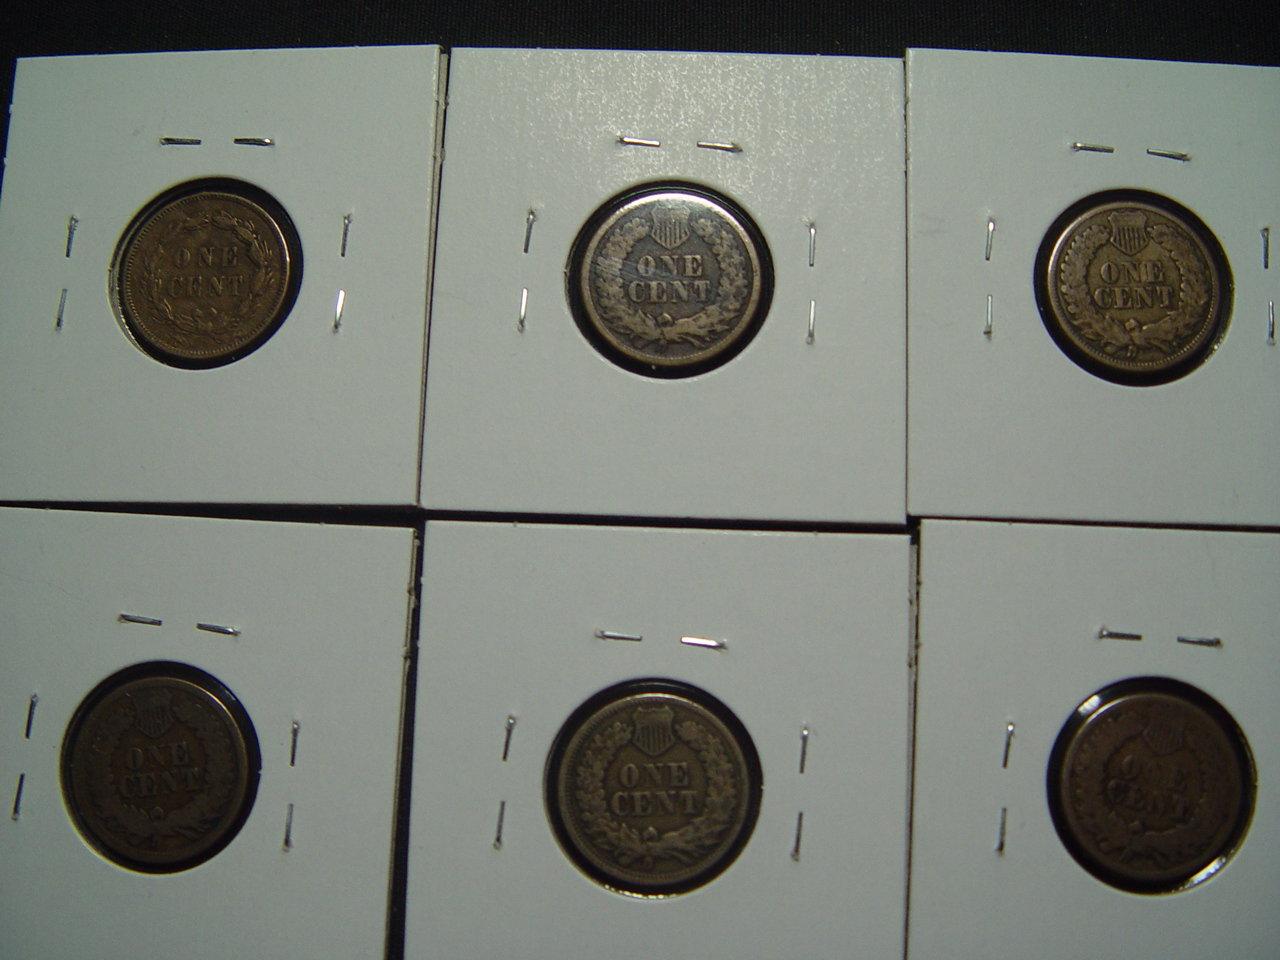 All Six Copper/Nickel Indian Cents  1859-1864   Good to Fine